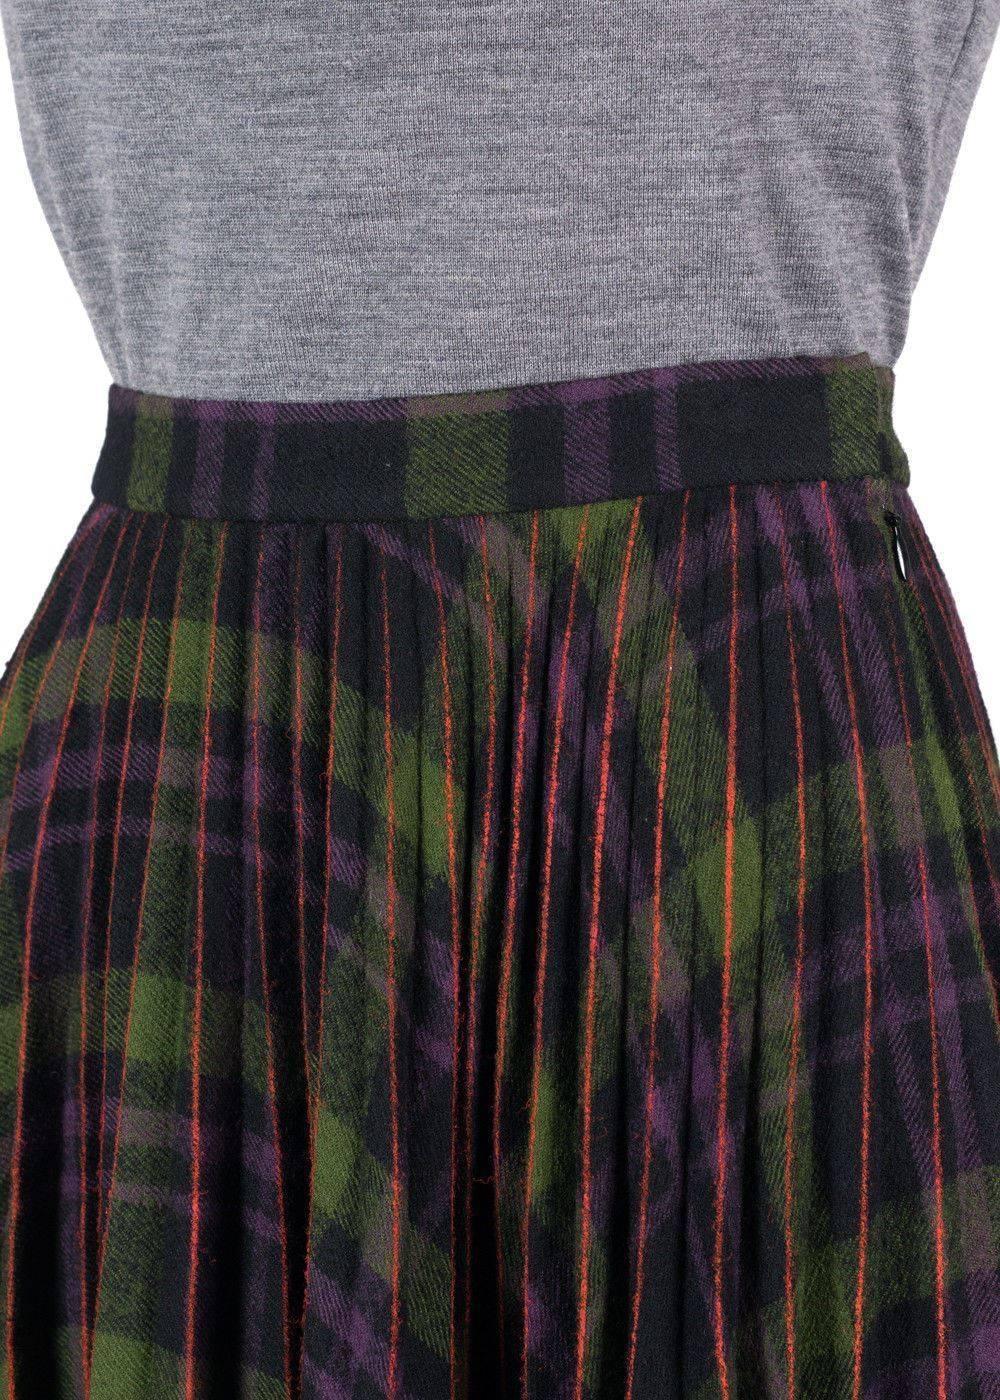 Brand New Women's Maison Margiela Plaid Pleated Skirt
Original with Tags
Retails in Stores & Online for $1710
Size EUR 42 / USA 6

Spice up your ensemble with Maison Margiela's playfully sophisticated plaid skirt. This piece features voluminous